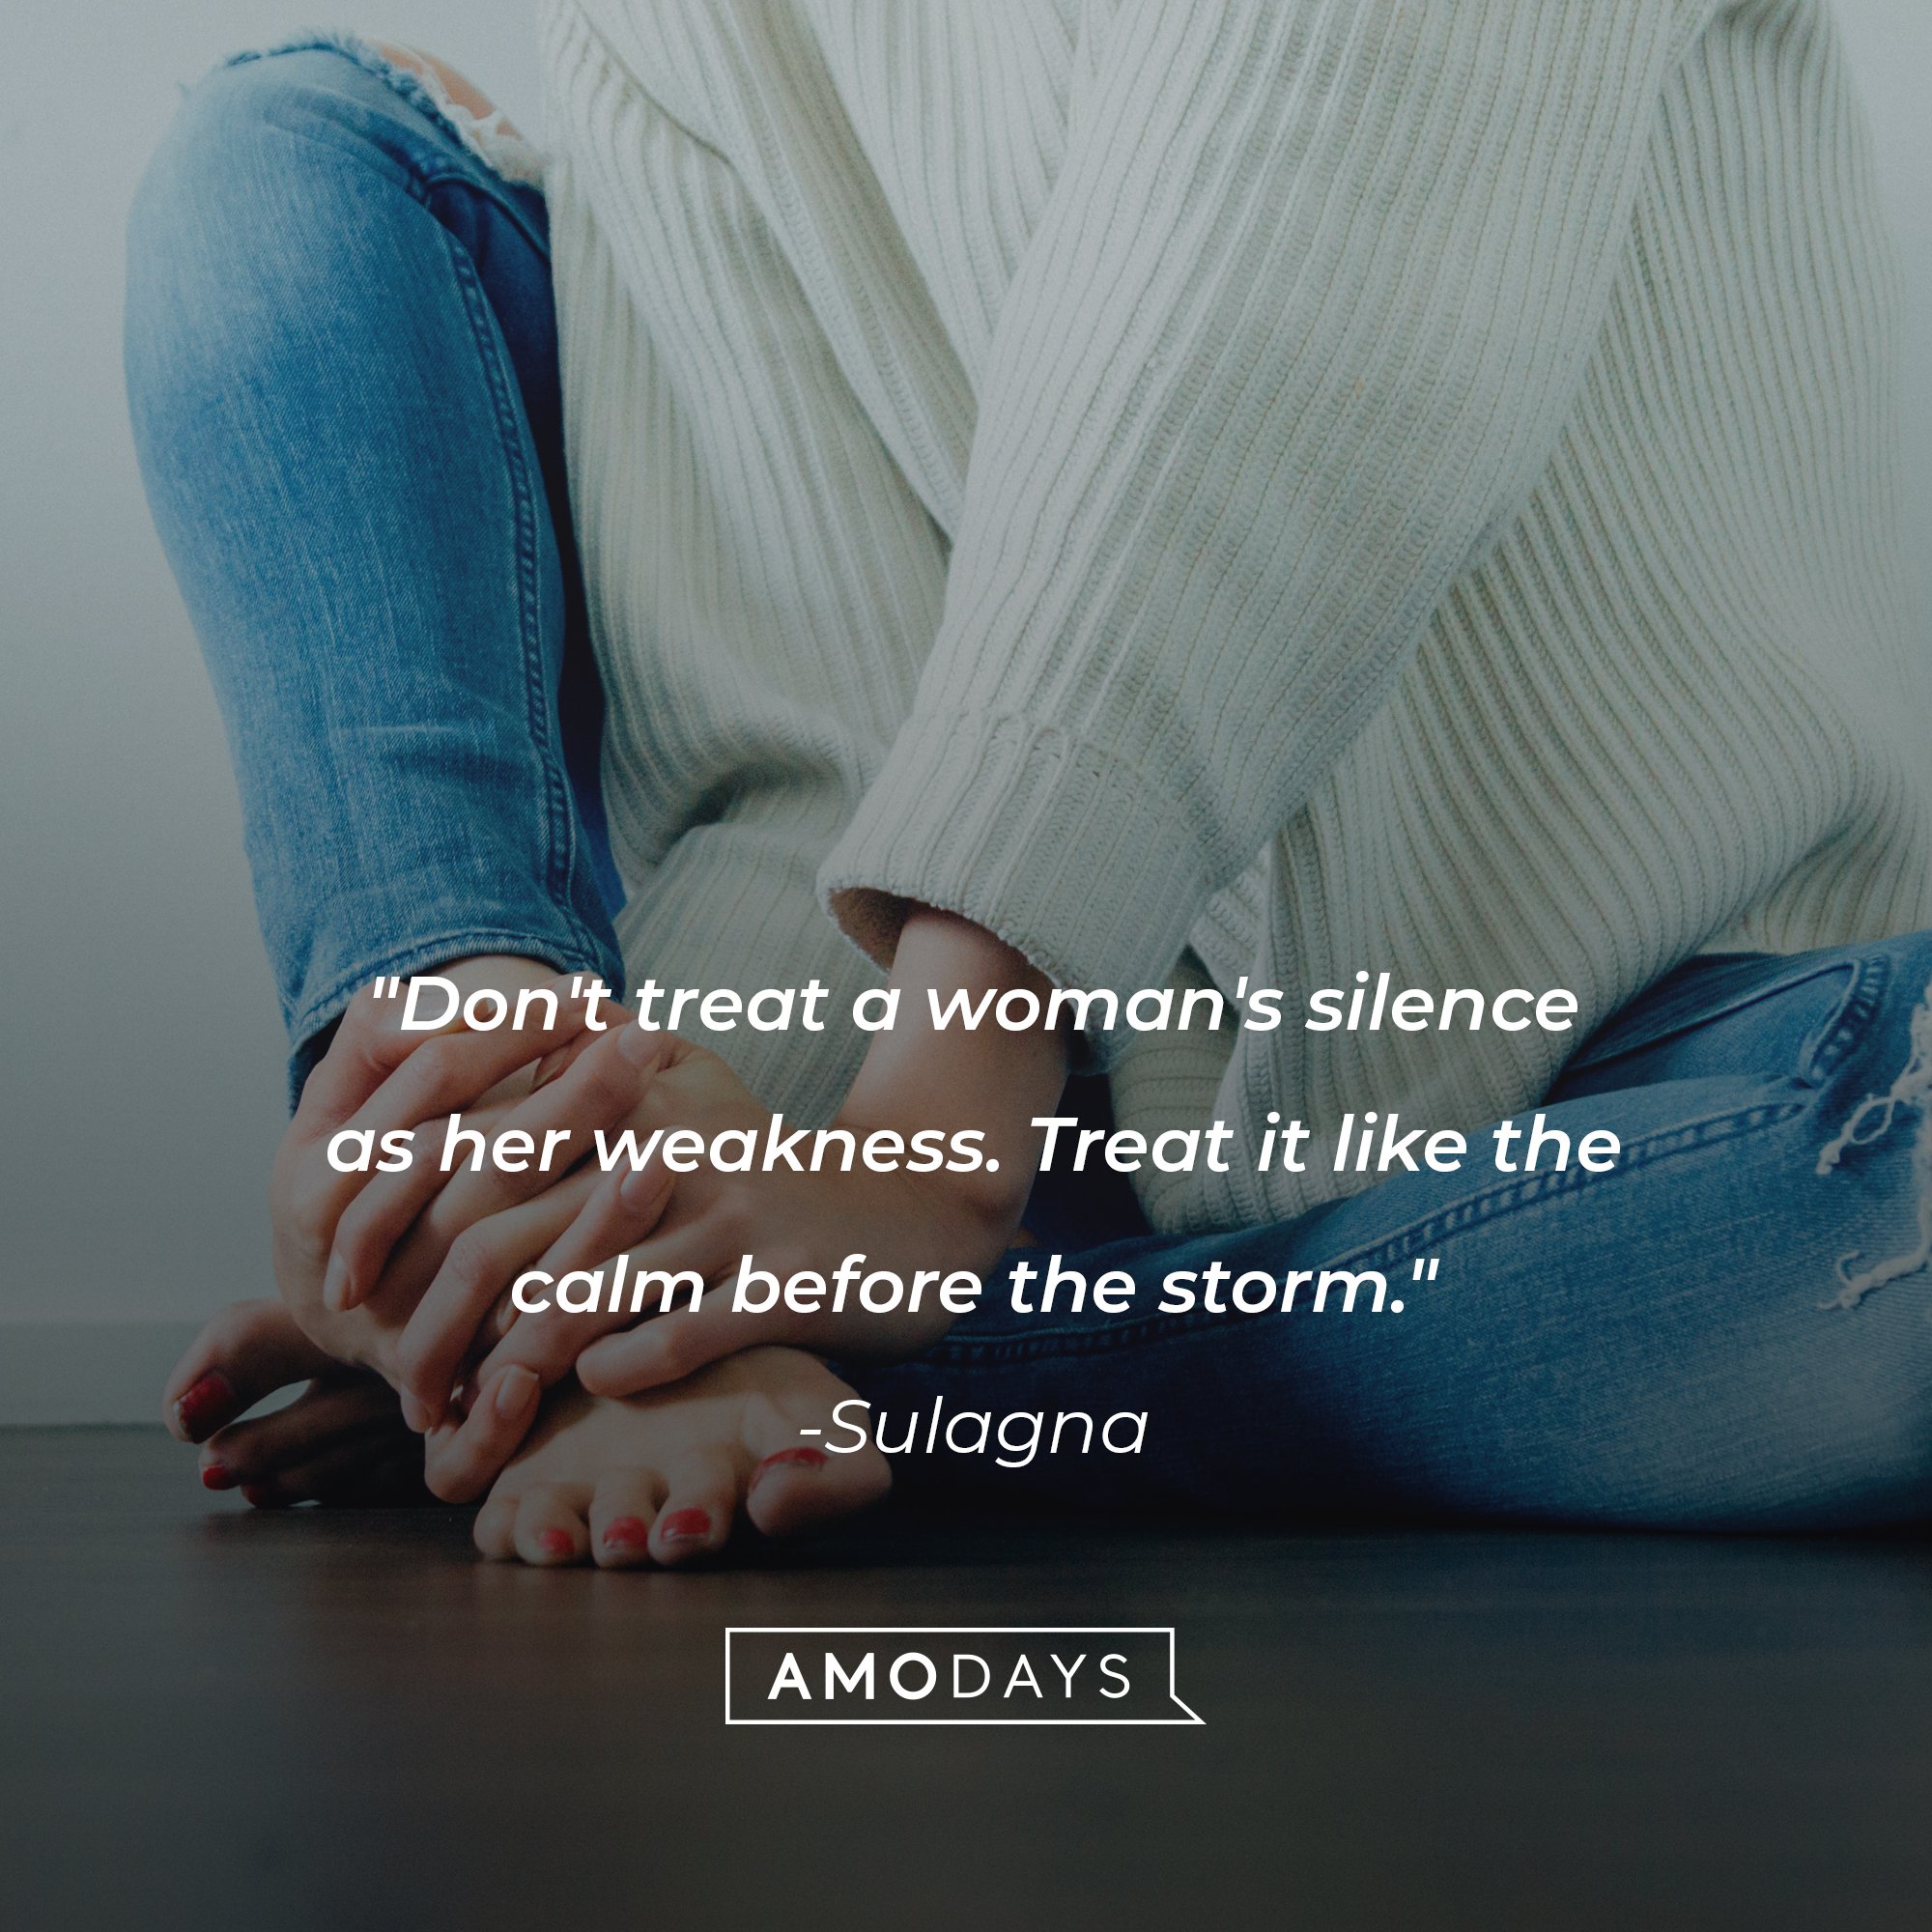 Sulagna’s quote: "Don't treat a woman's silence as her weakness. Treat it like the calm before the storm." | Image: AmoDays 